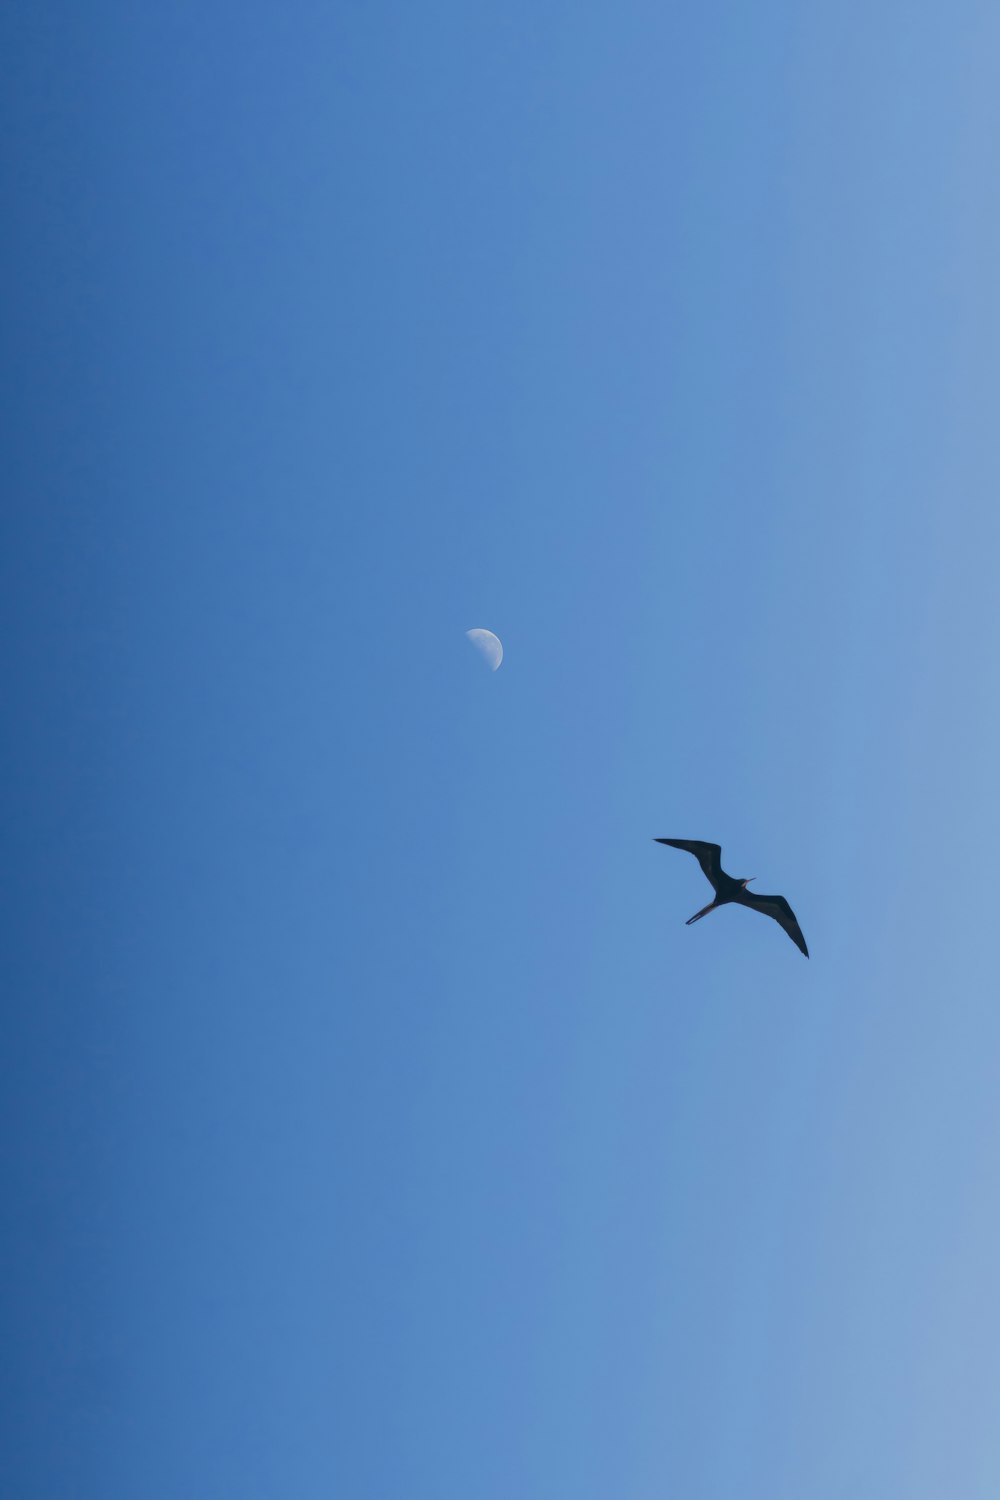 a bird flying in the sky with a half moon in the background